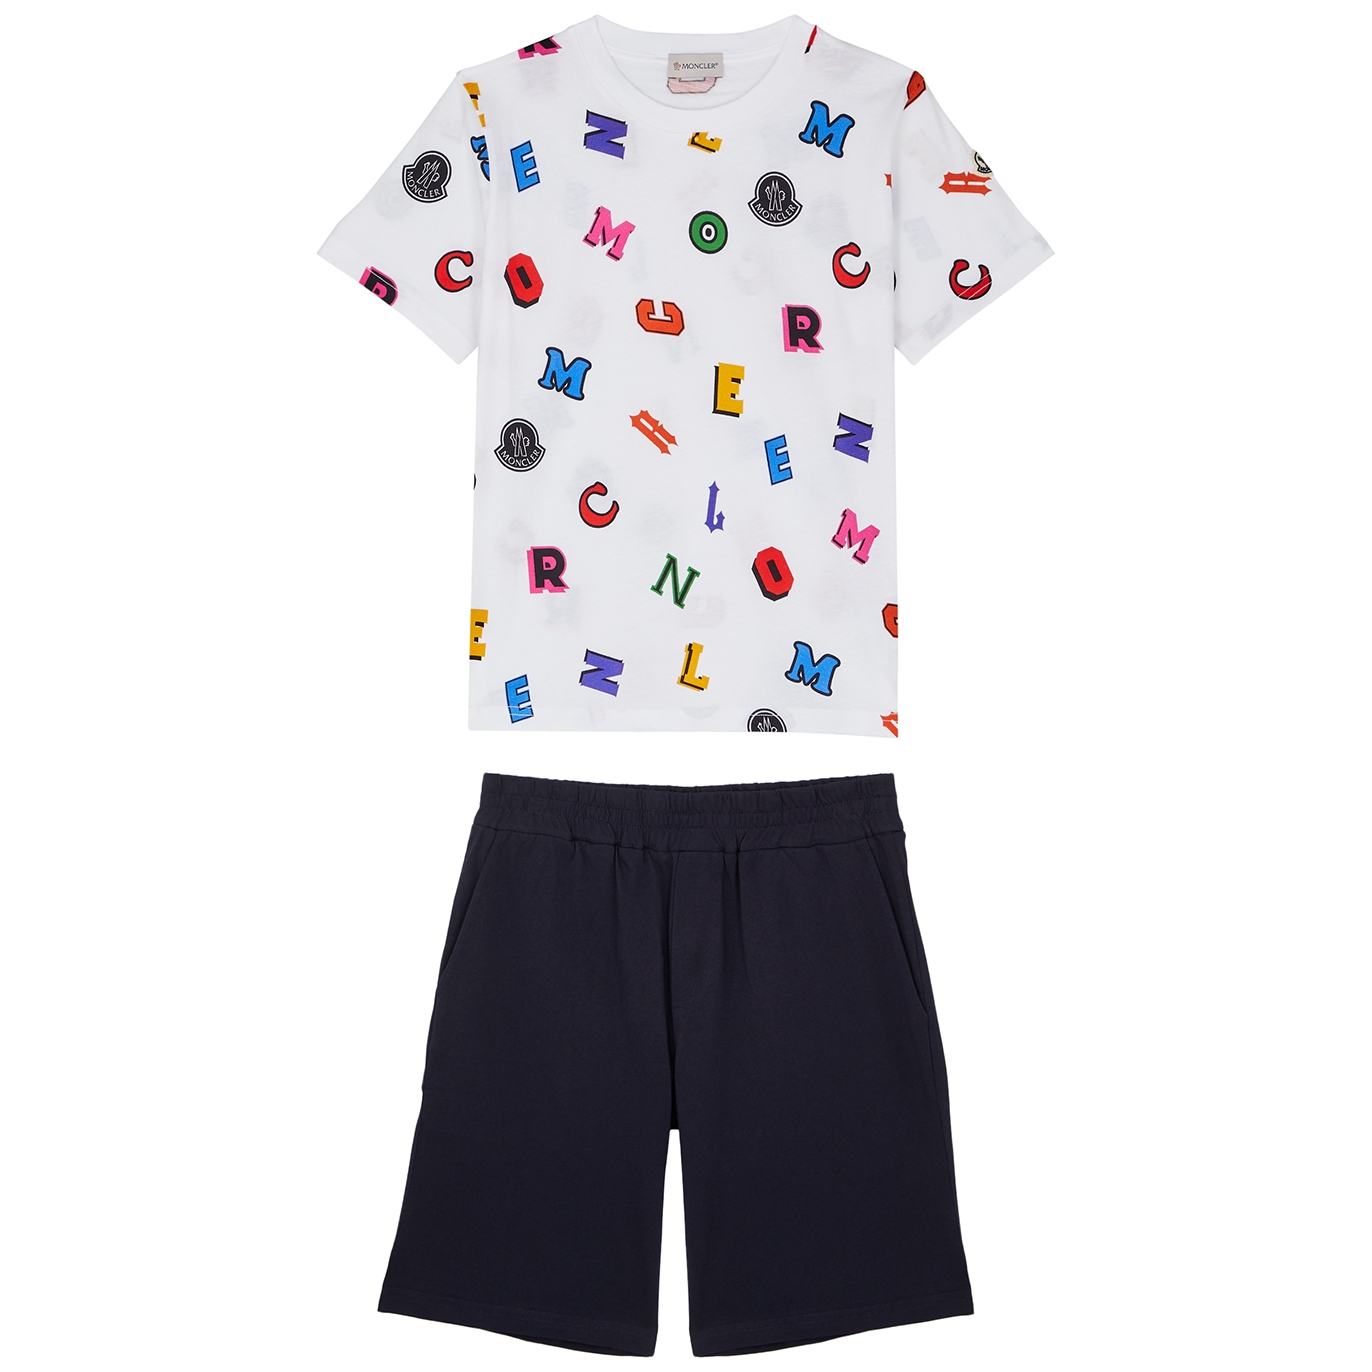 Moncler Kids Printed Cotton T-shirt And Shorts Set (12-14 Years) - White Other - 12 Years